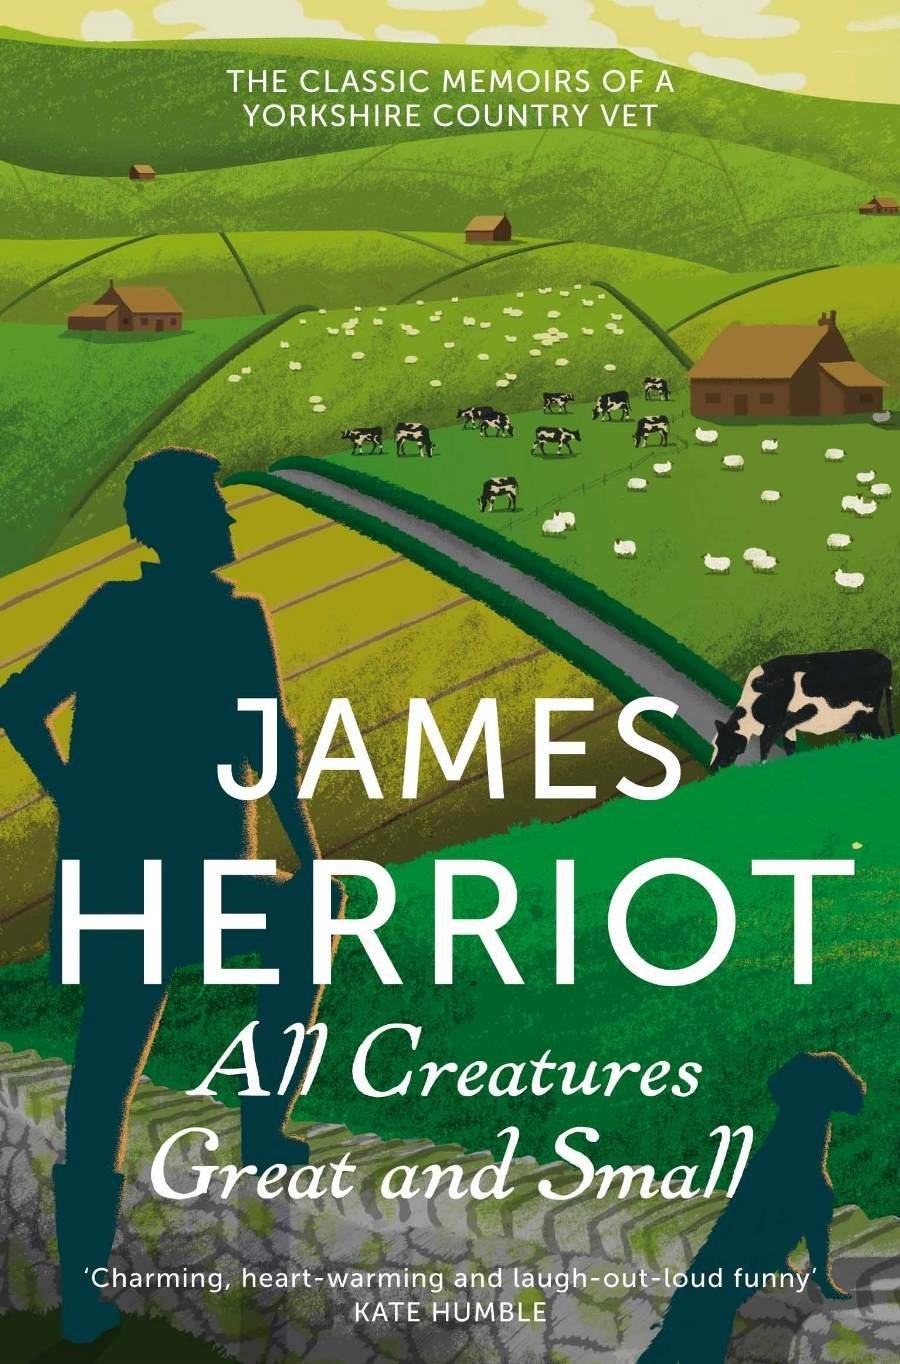 all-creatures-great-and-small-the-classic-memoirs-of-a-yorkshire-country-vet-lit-books